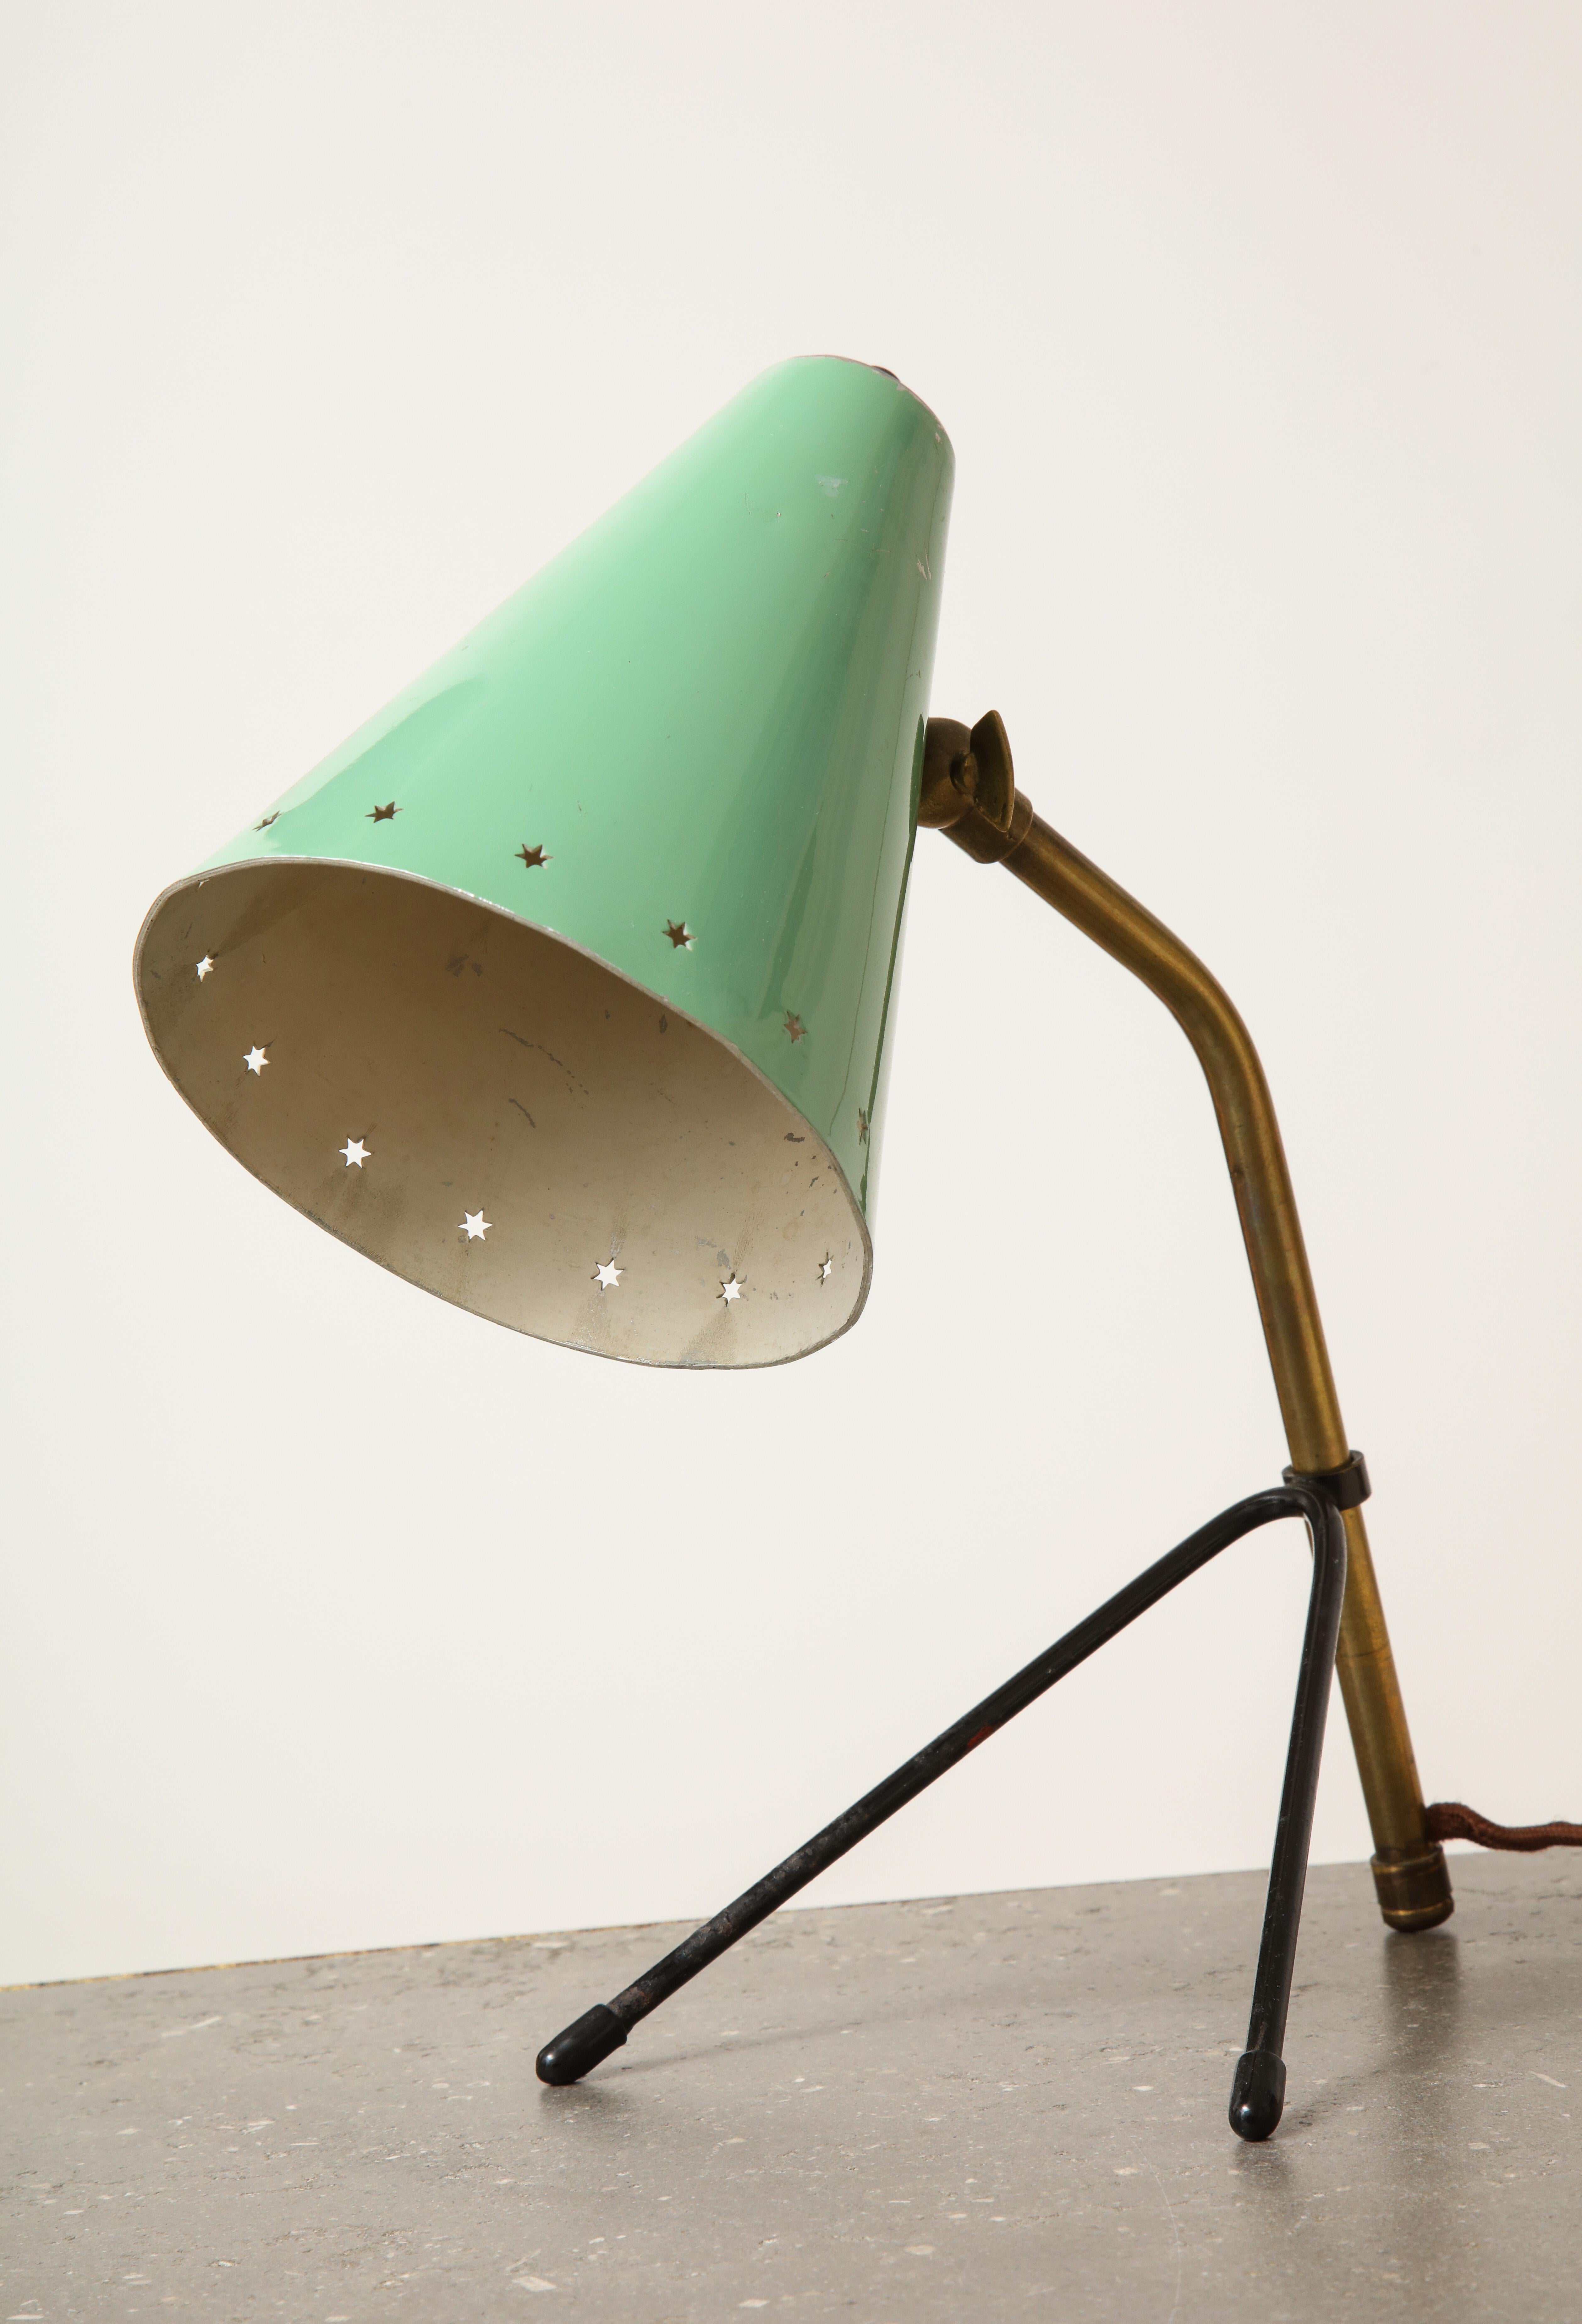 Painted Italian Midcentury Adjustable Brass Desk Lamp with Mint Green Shade